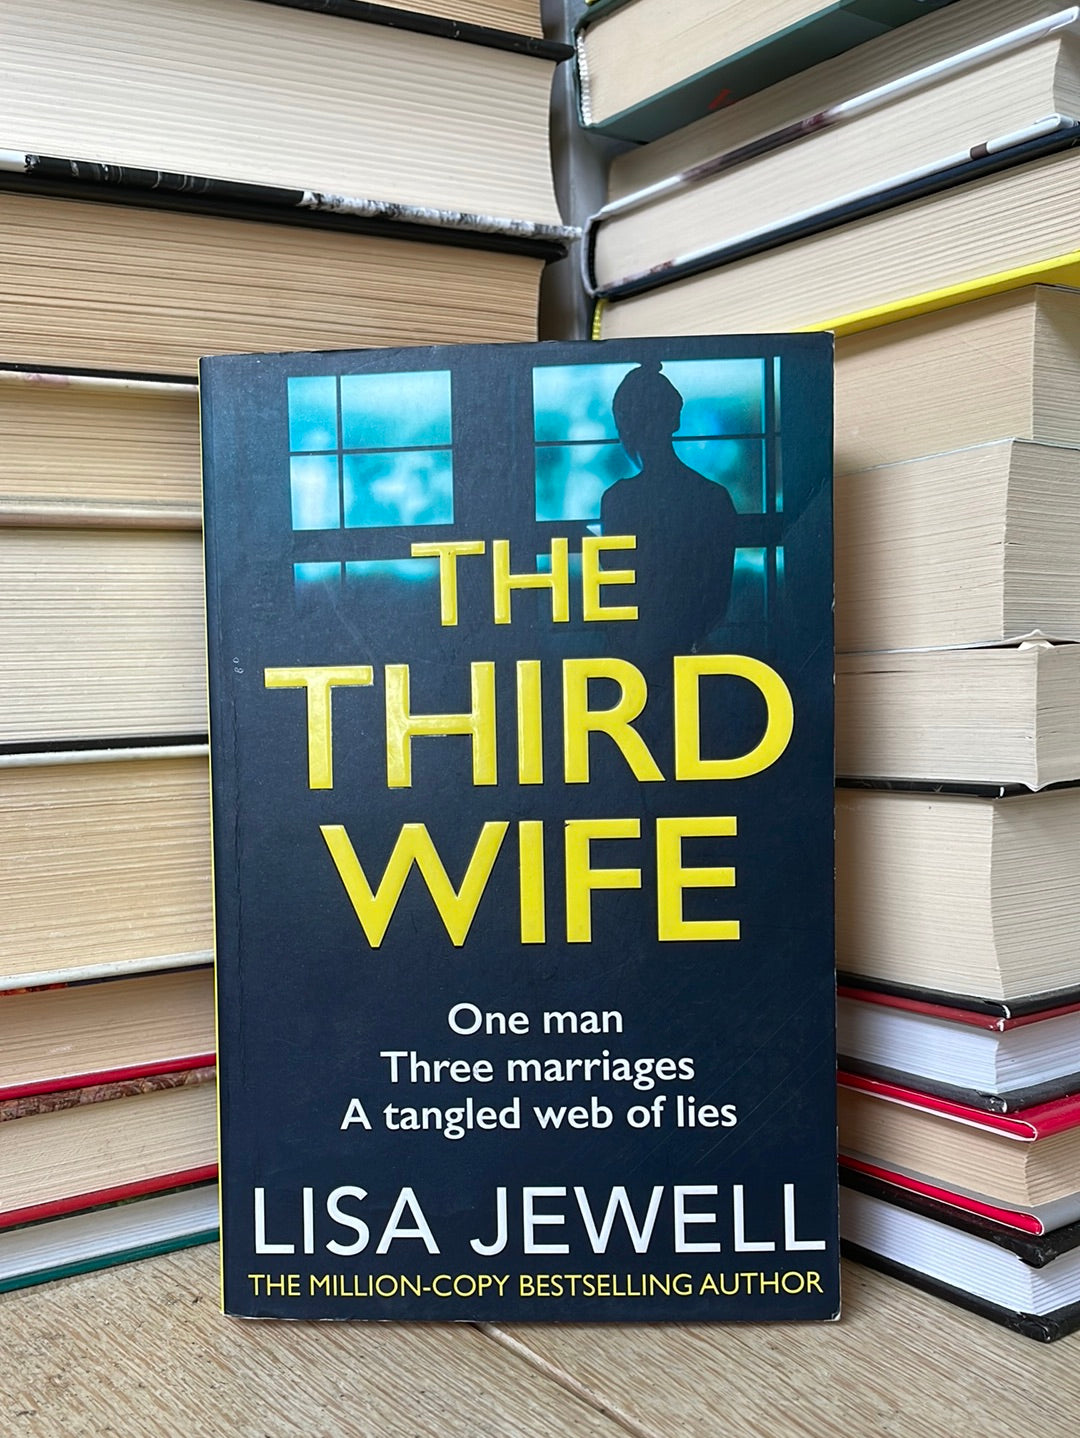 Lisa Jewell - The Third Wife